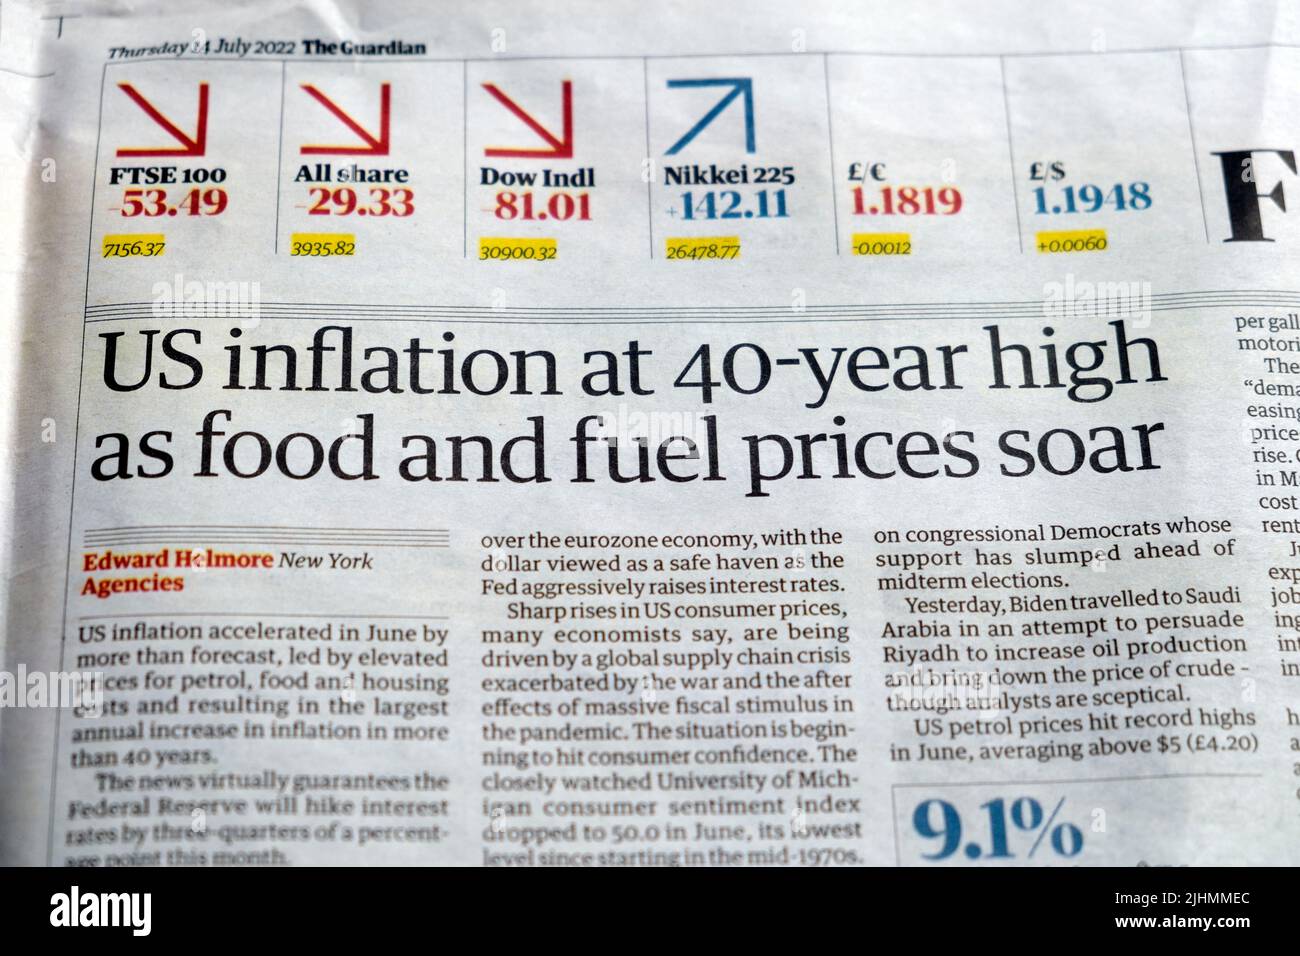 'US inflation at 40 year high as food and fuel prices soar' Guardian newspaper headline financial clipping 14 July 2022 London UK Stock Photo